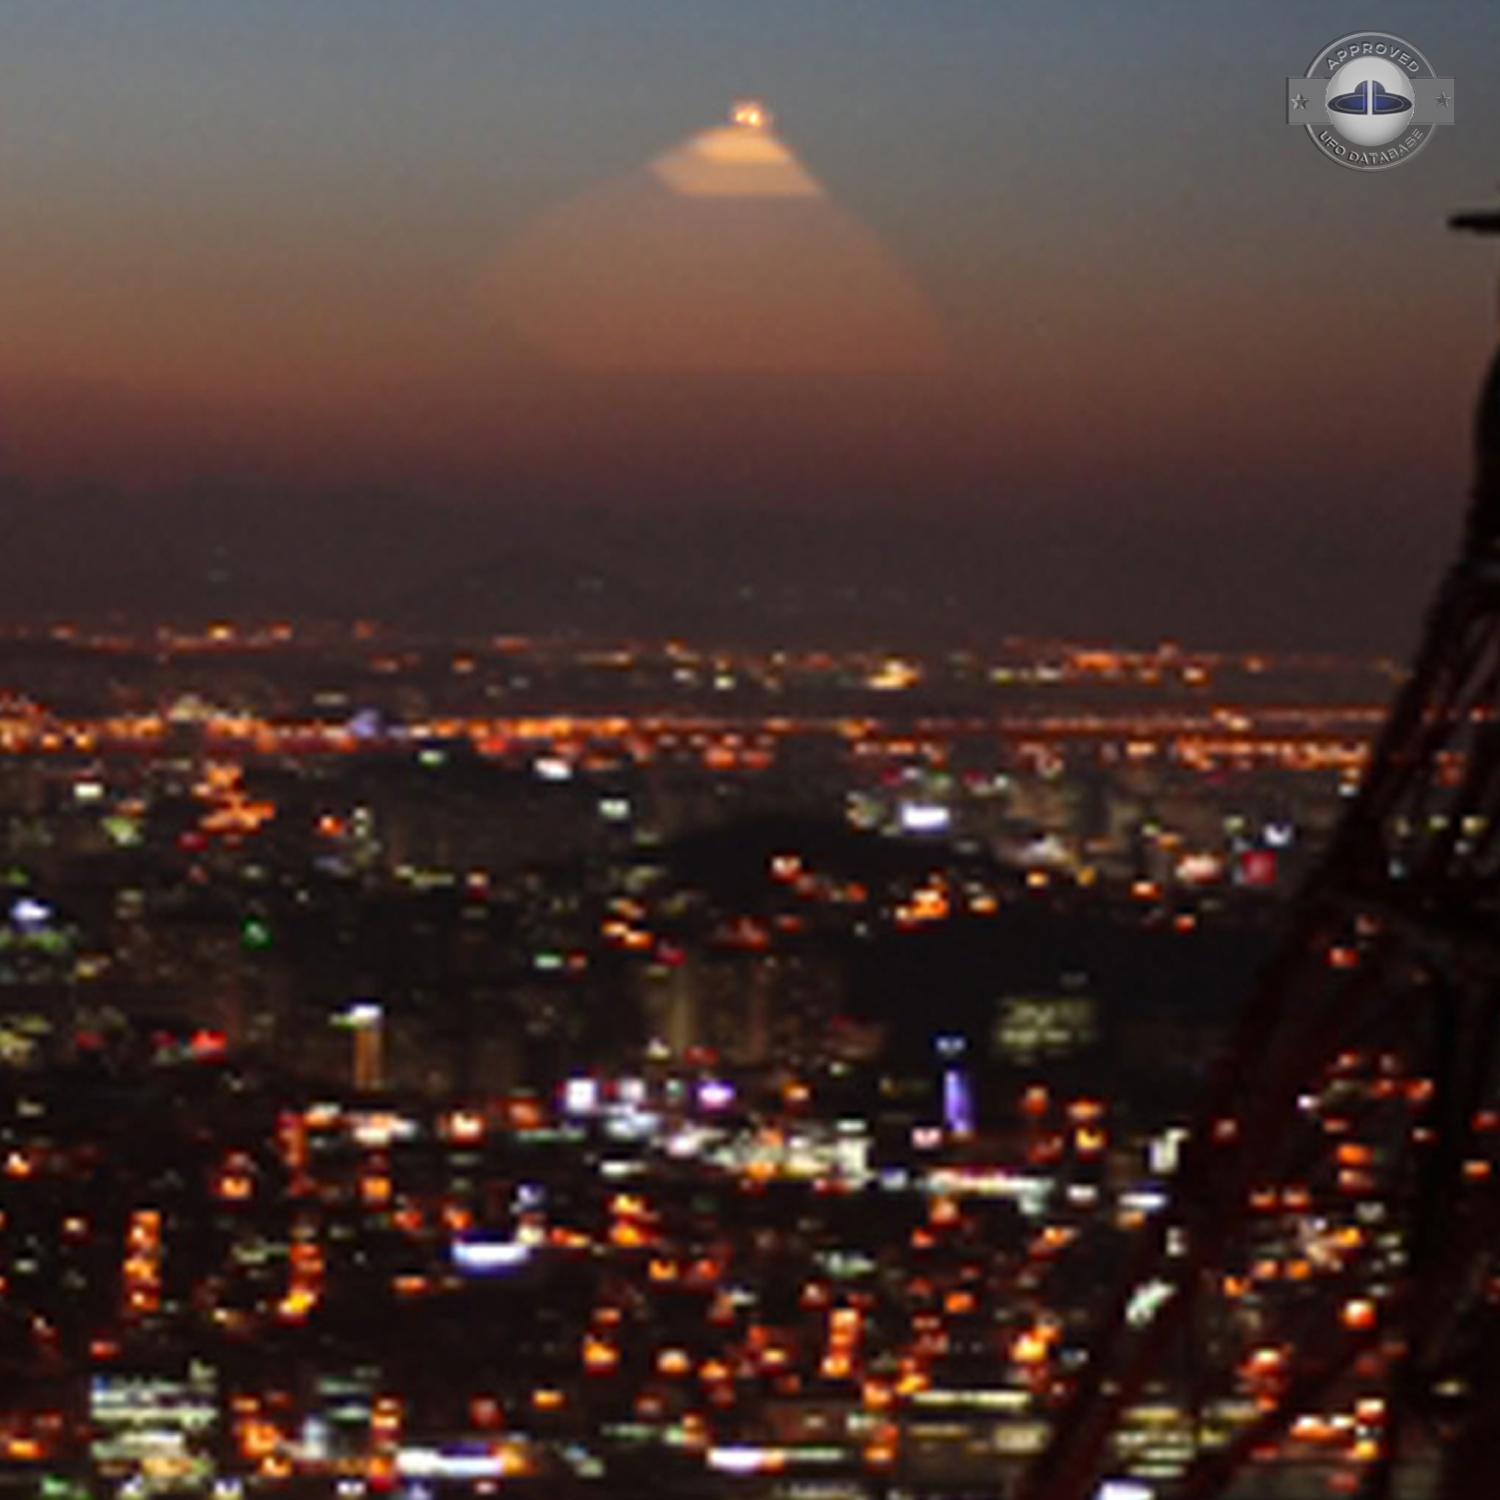 UFO Picture taken from N Seoul Tower | Namsan mountain, South Korea UFO Picture #172-3